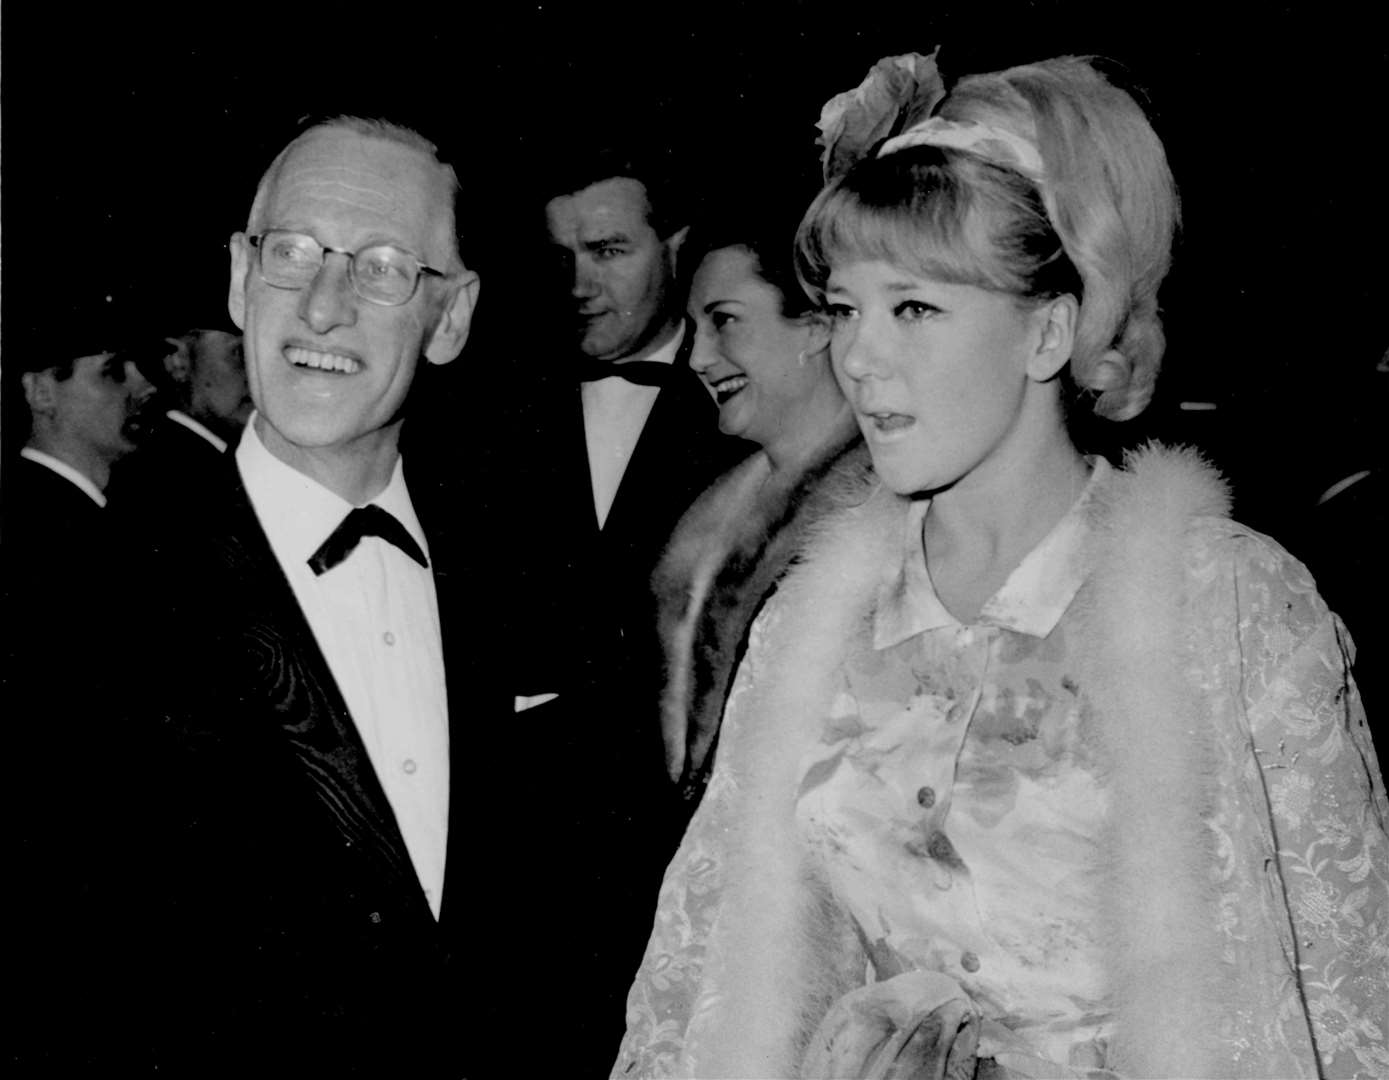 Steptoe Snr (AKA Wilfred Brambell) escorts actress Julia Foster to the ABC Cinema in Canterbury for the provincial premiere of Becket in April 1964. Other guests included Ronald Fraser and Charles Hawtrey. The cinema site in St George's Place is now home to the Odeon, used as a vaccine centre during the Covid pandemic